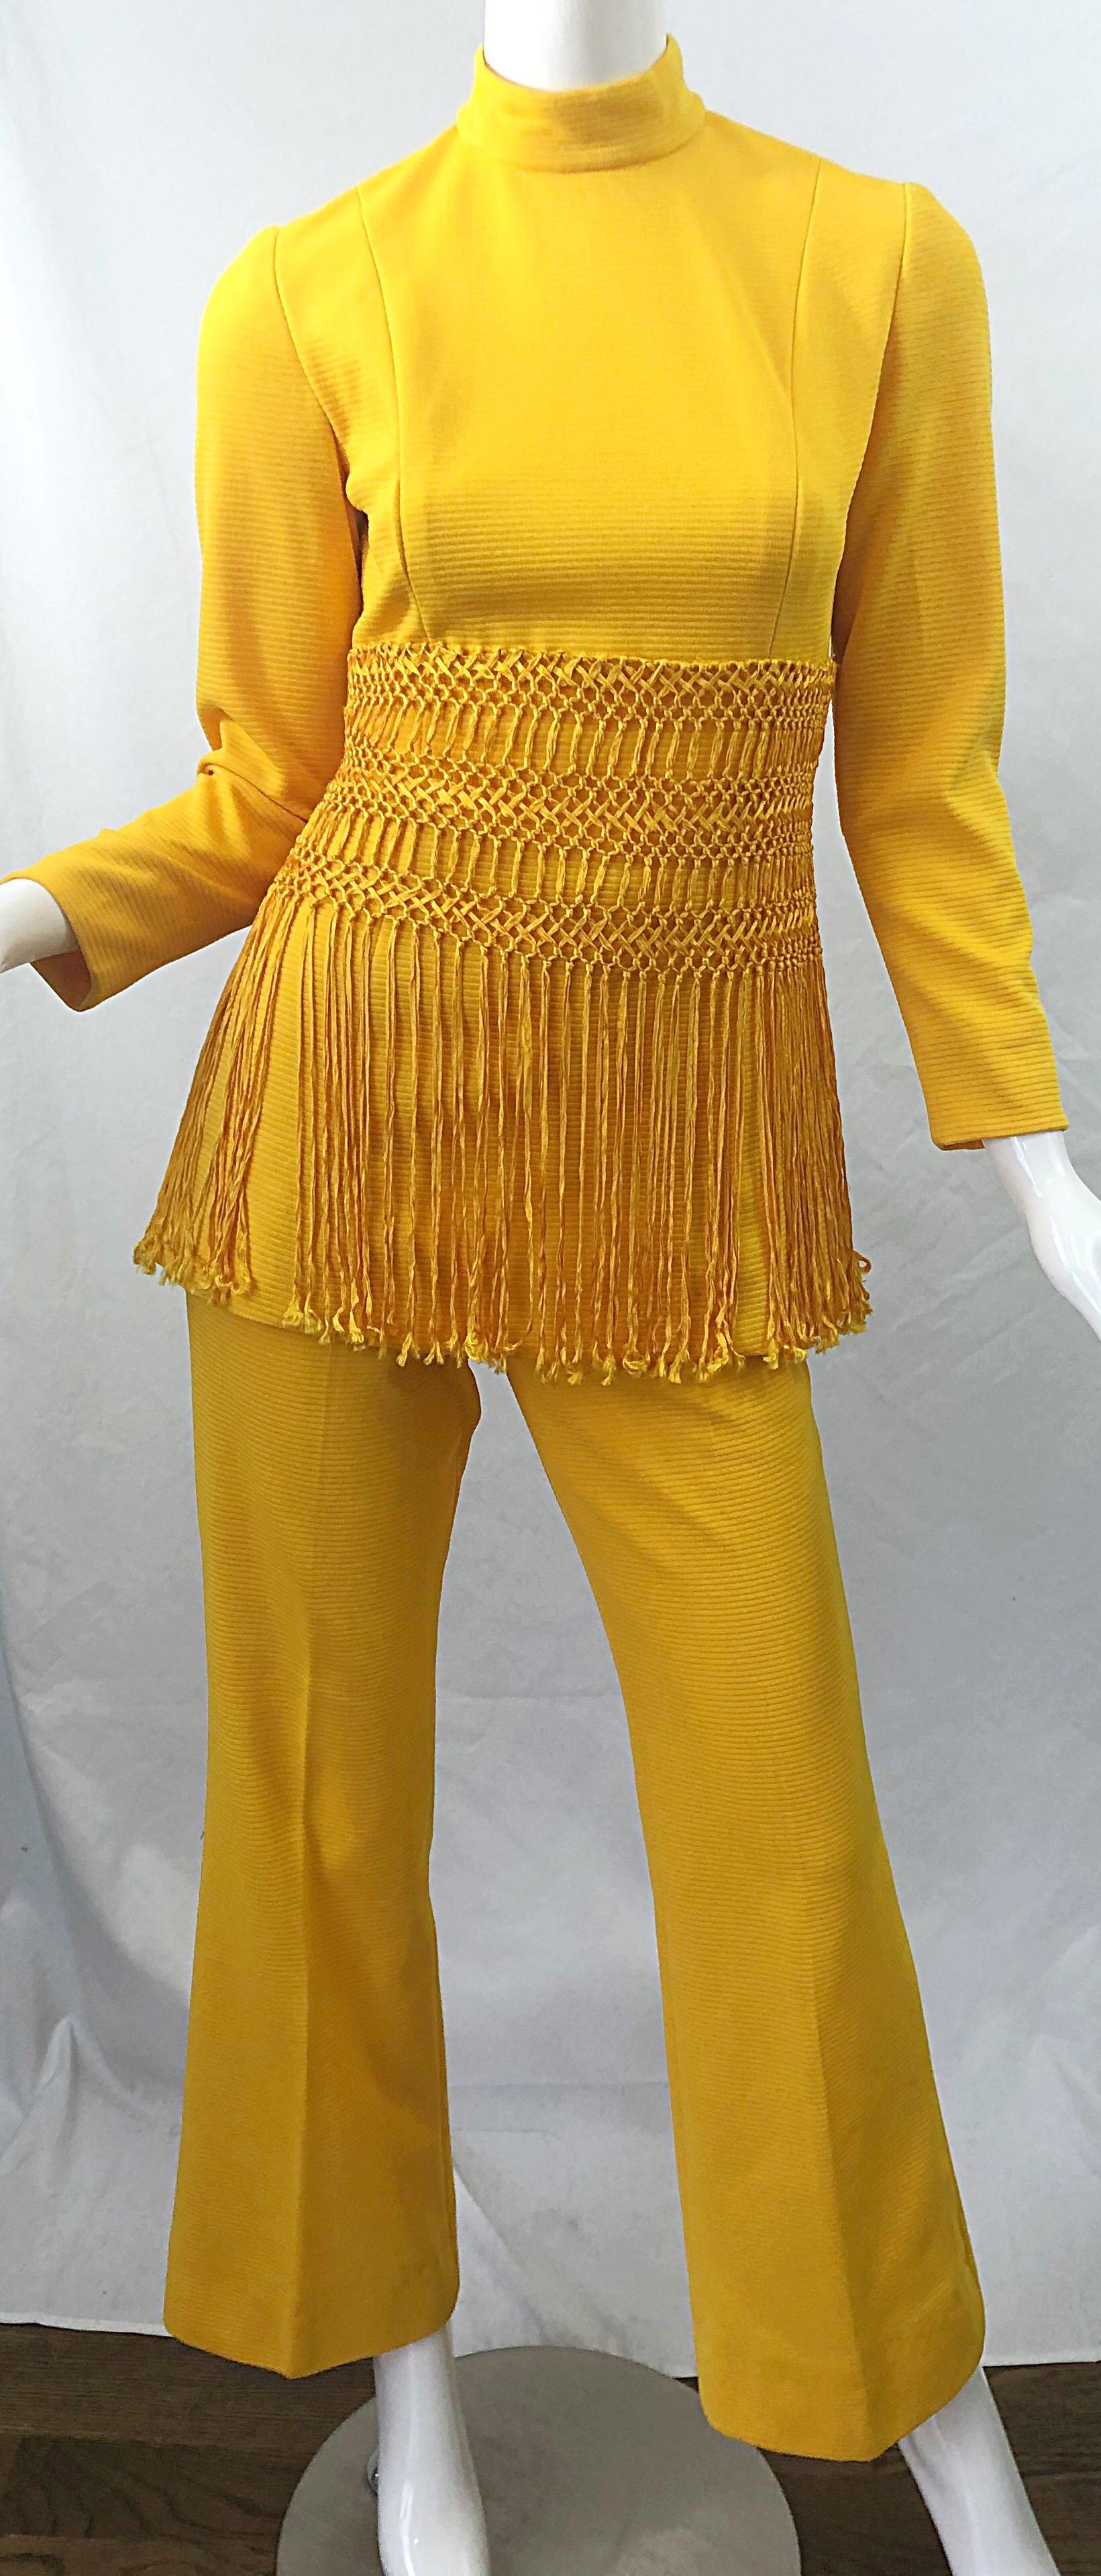 Women's 1970s Canary Yellow Fringe Vintage Knit Tunic Top + 70s Bell Bottom Flared Pants